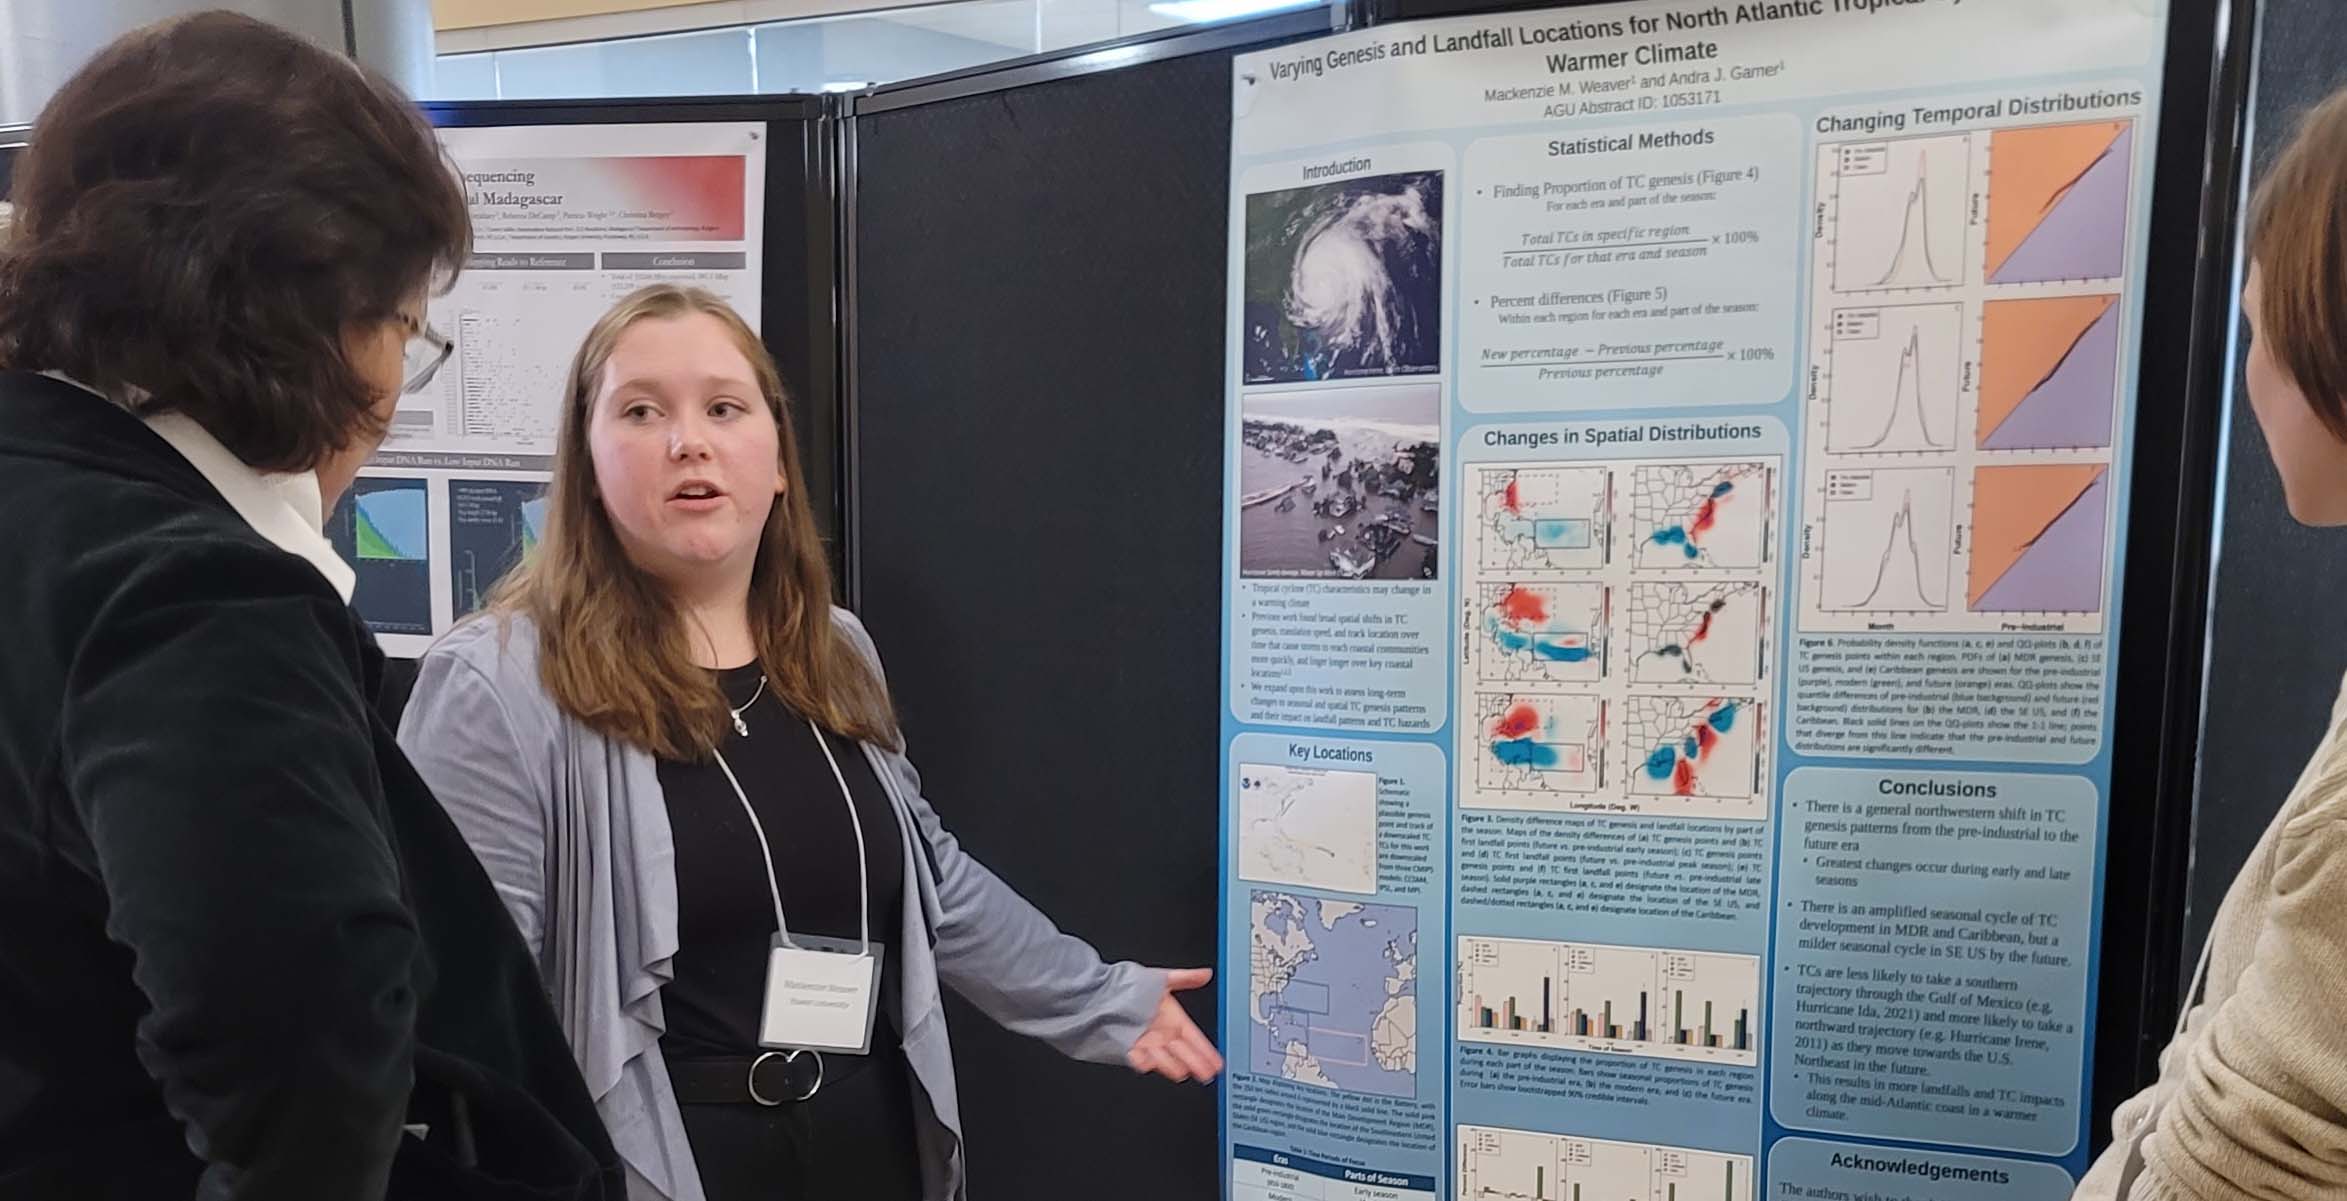 Senior Environmental Science student Mackenzie Weaver shares her research about formation and landfall behavior of North Atlantic hurricanes in a warmer climate at the Rutgers Climate Symposium